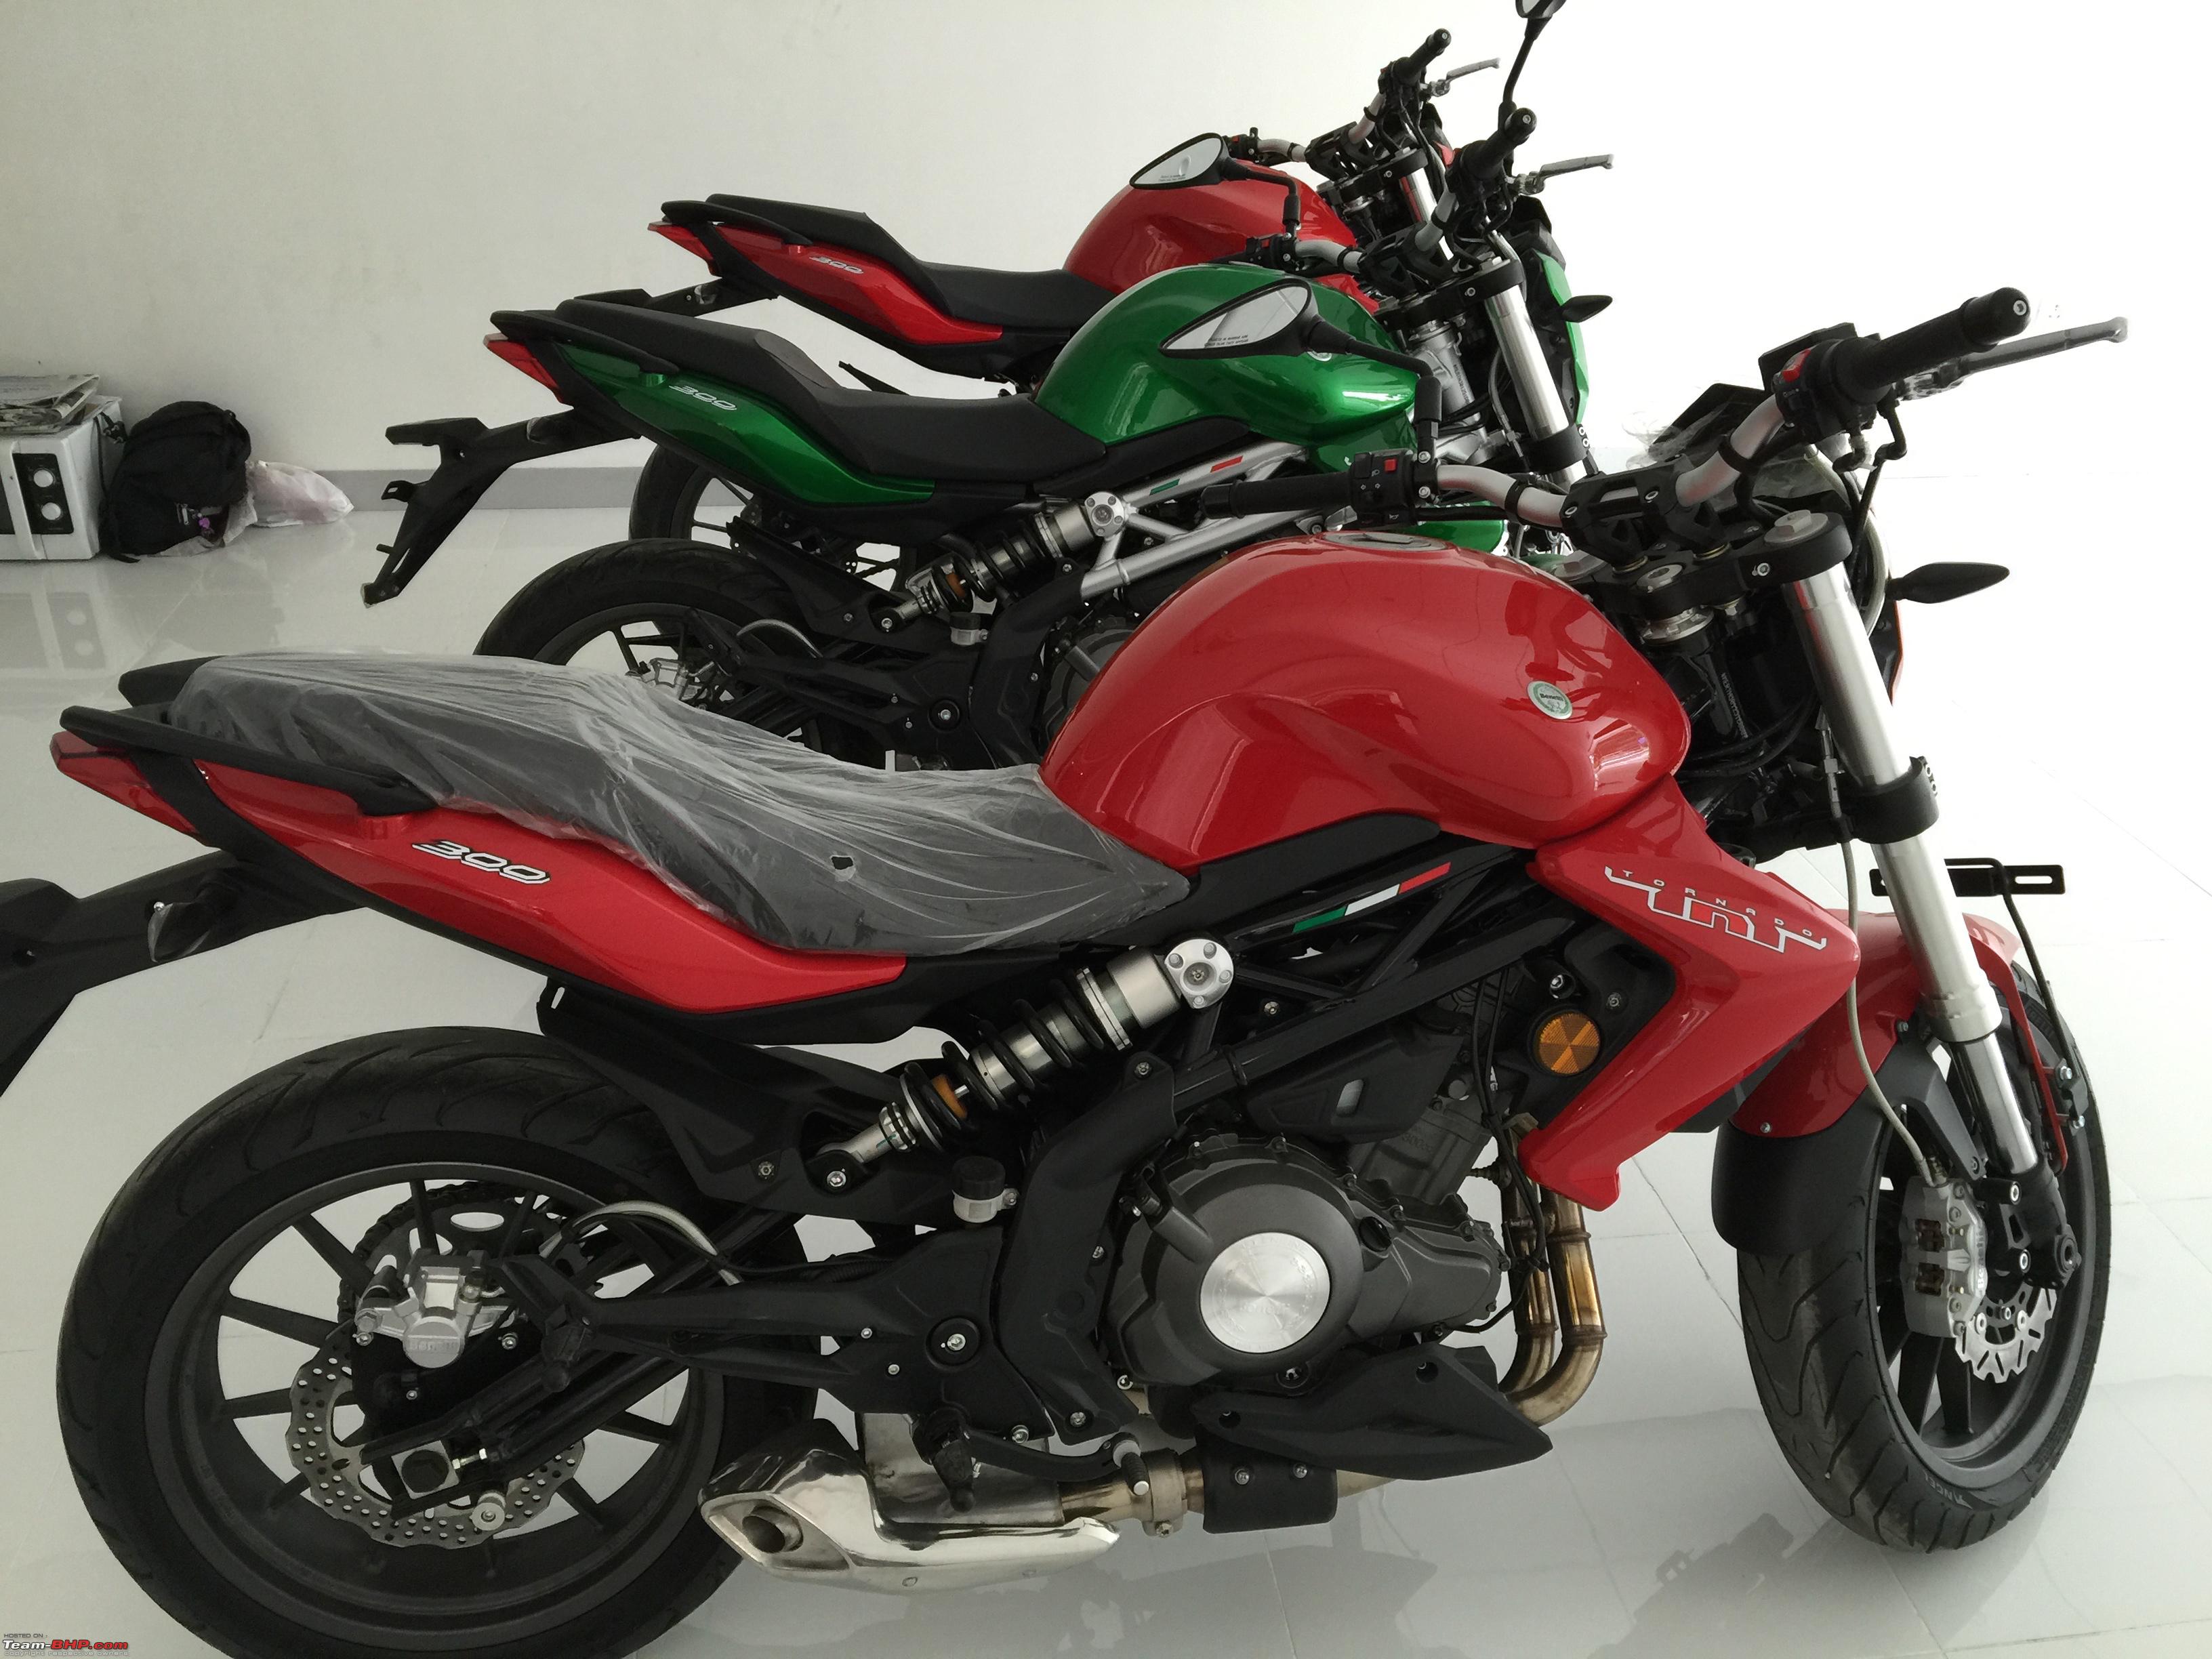 Benelli TNT 300 Price, Features, Specifications, 43% OFF